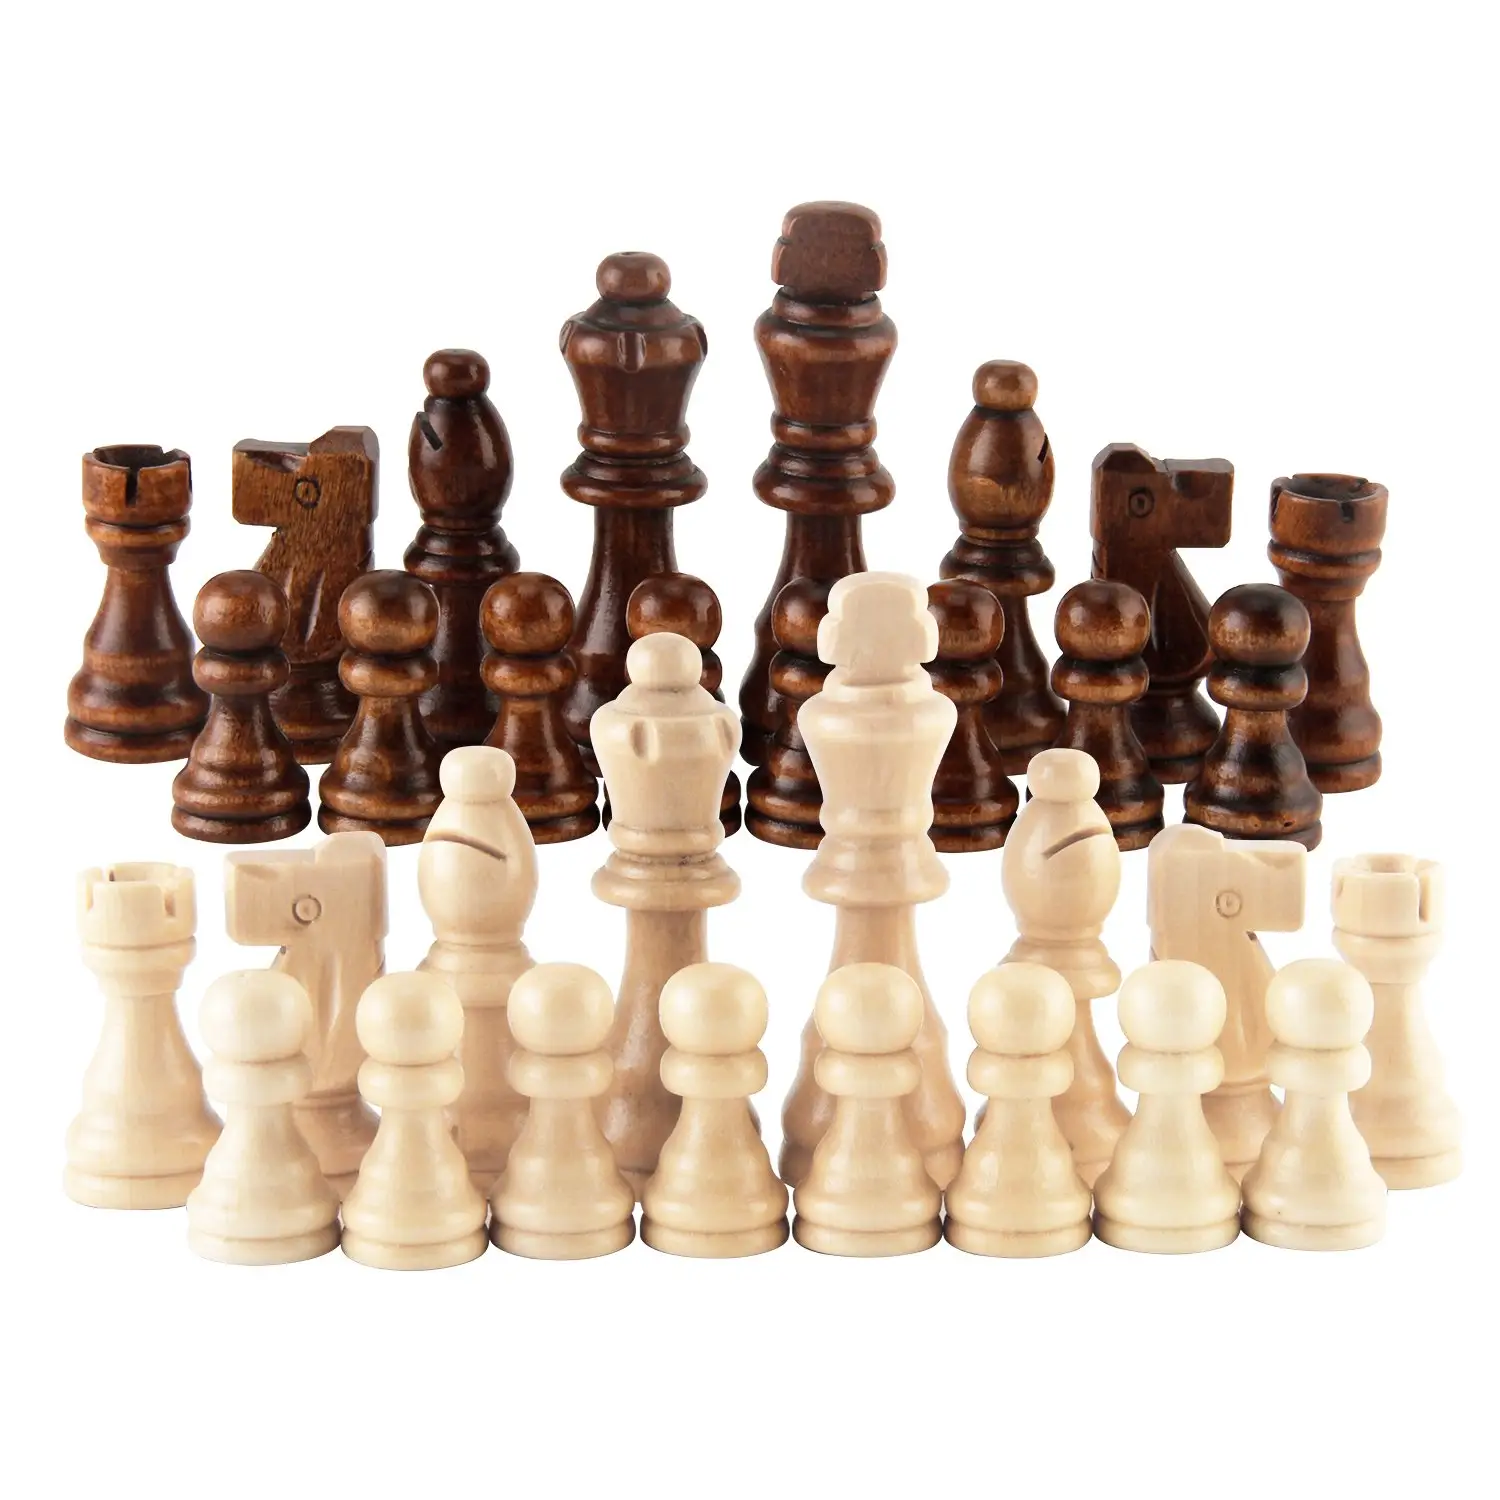 staunton style chess pieces wooden pawns hand carved figure figurine board game pieces nature wood chessmen